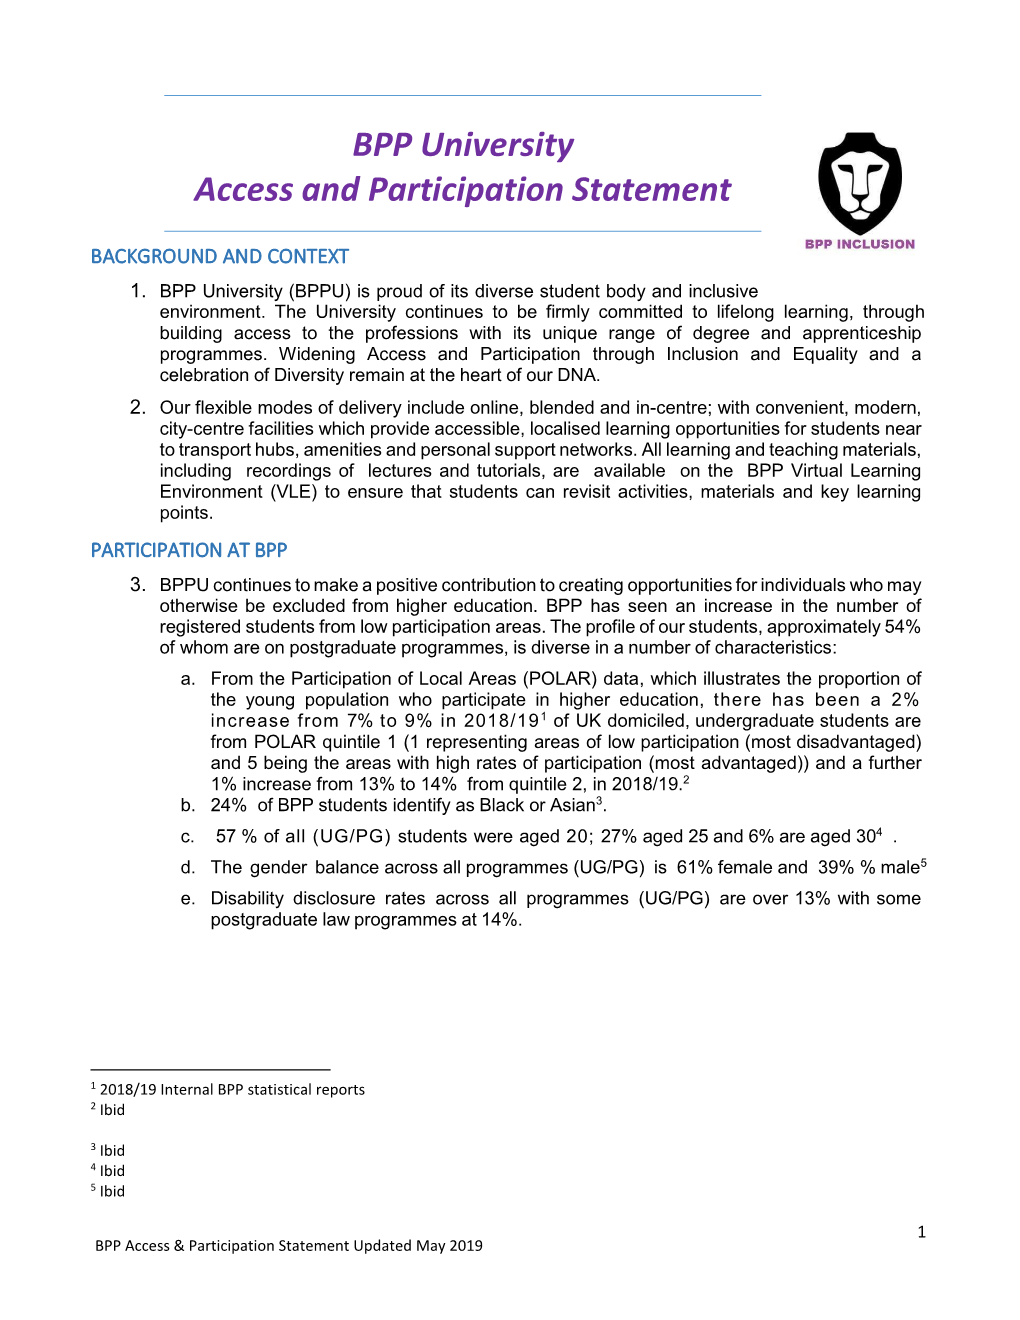 BPP University Access and Participation Statement